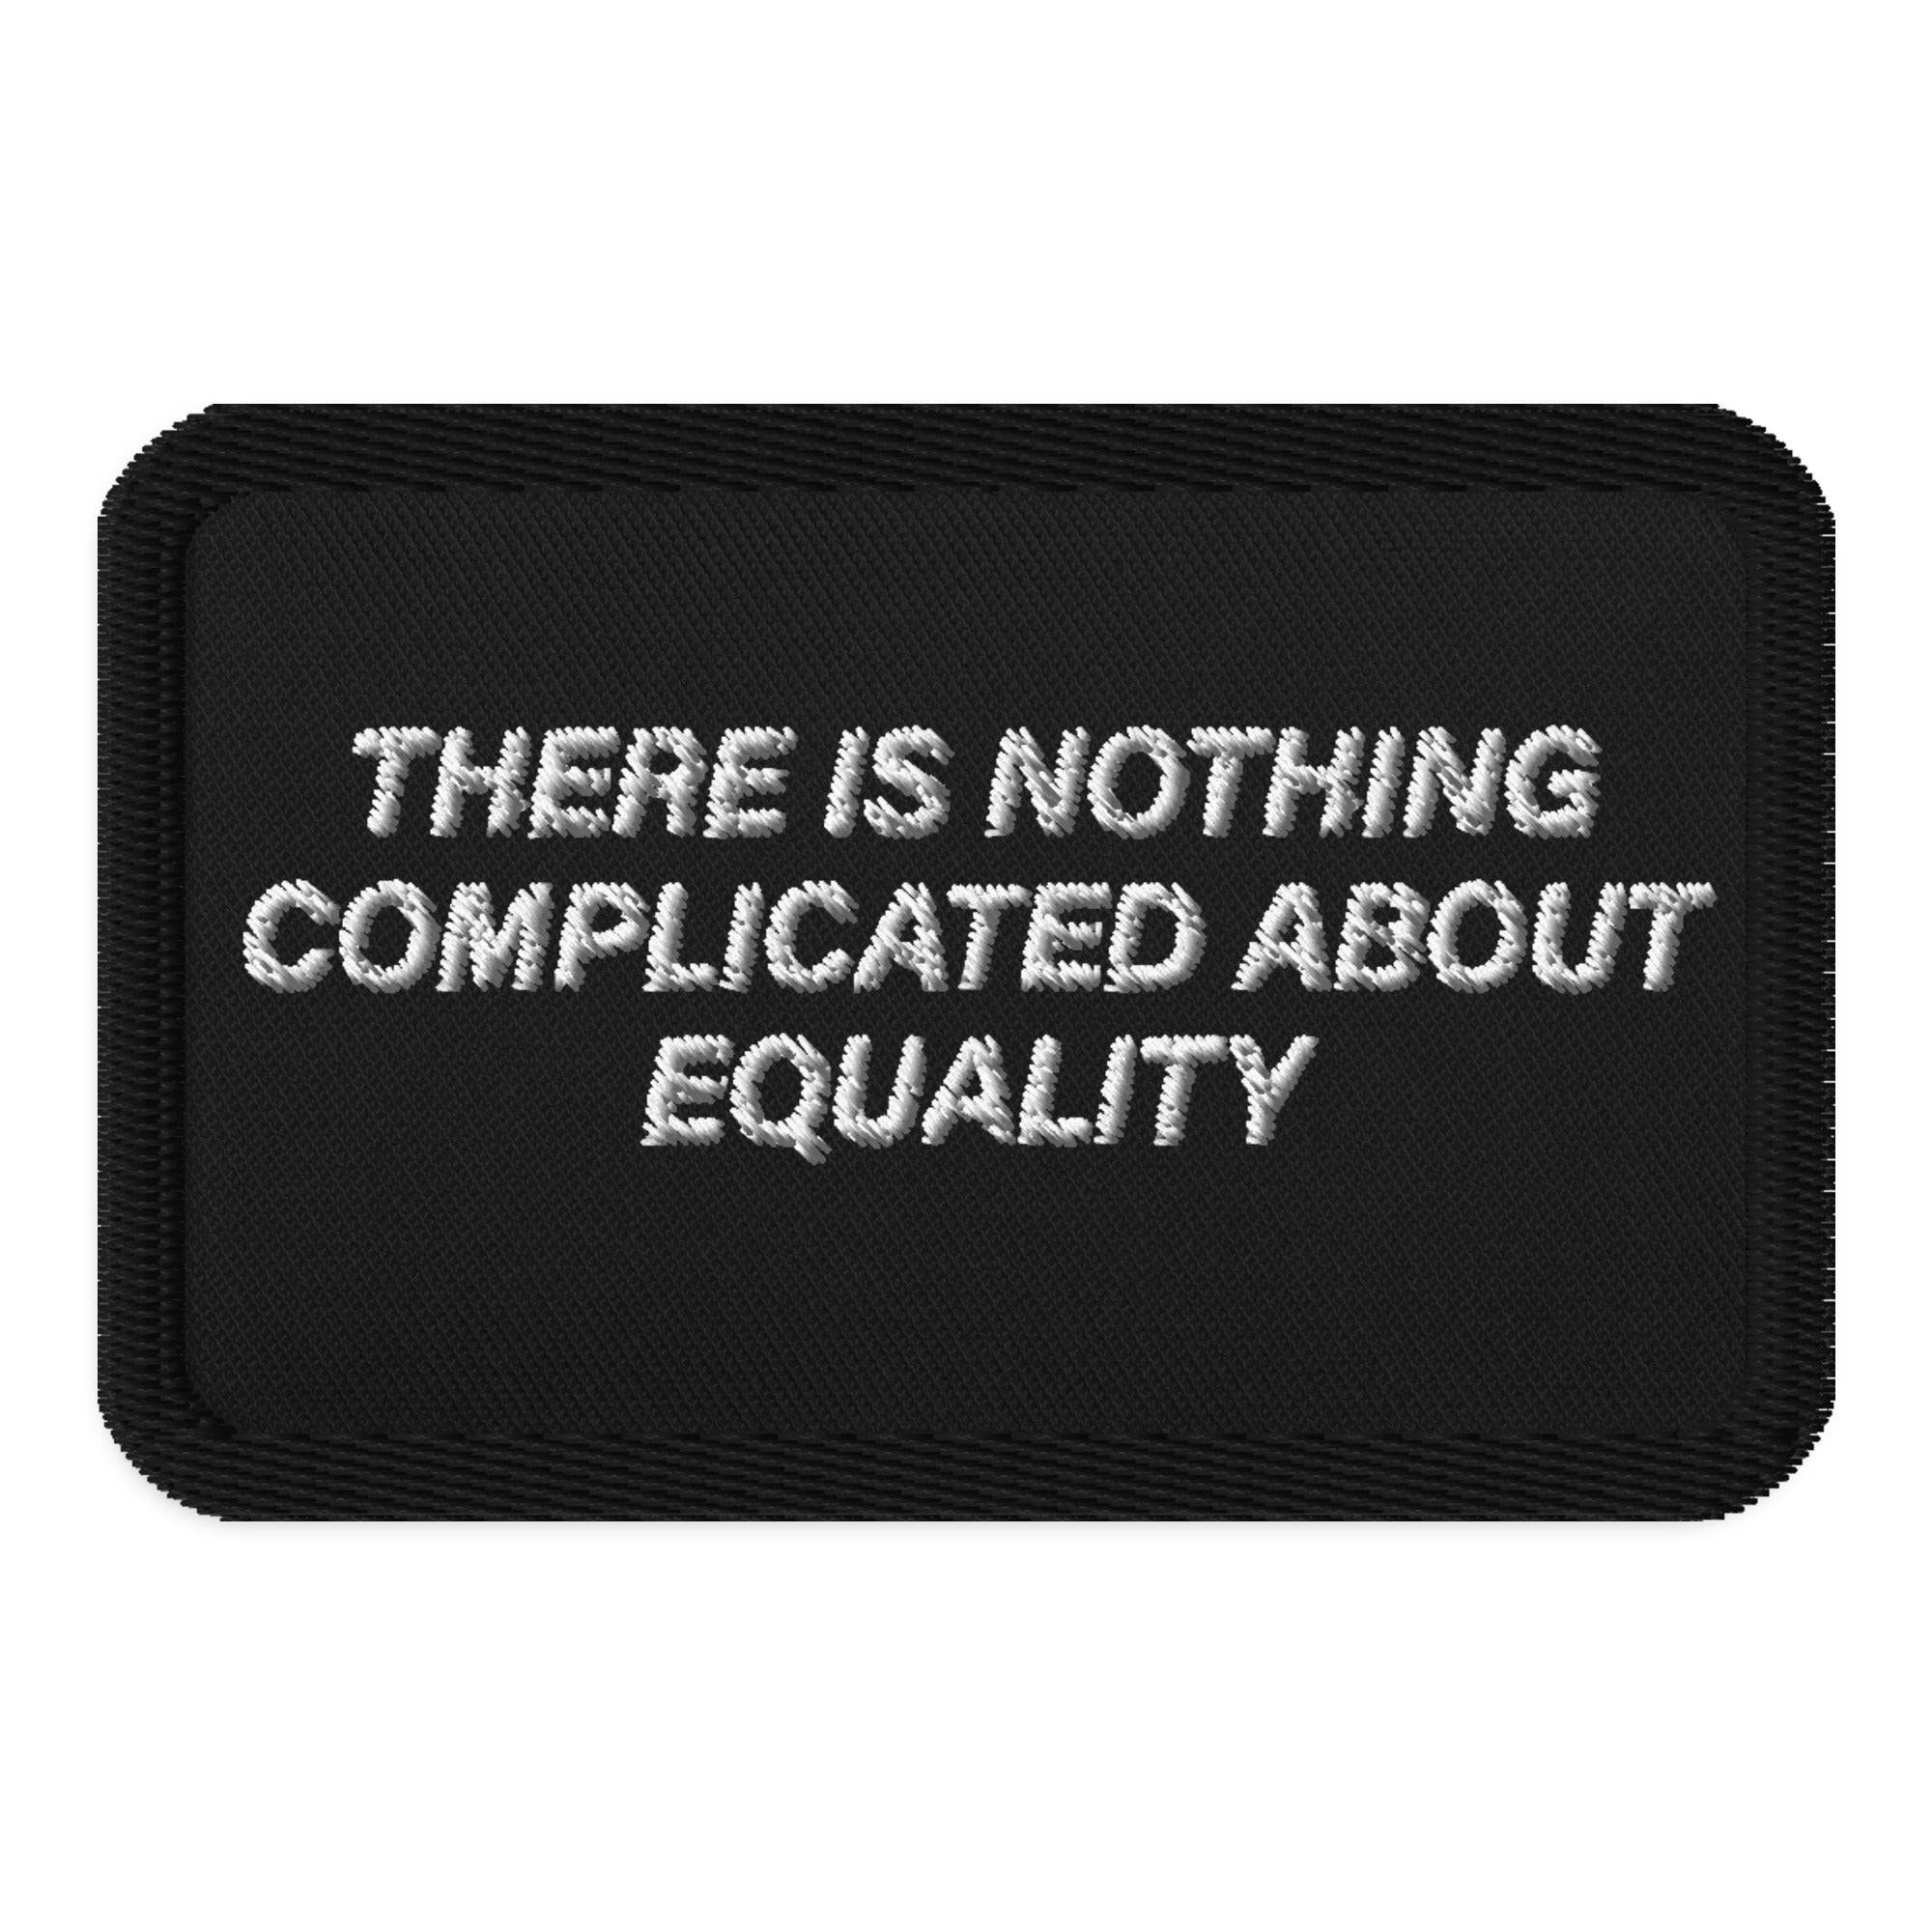 Nothing Complicated About Equality Embroidered patch